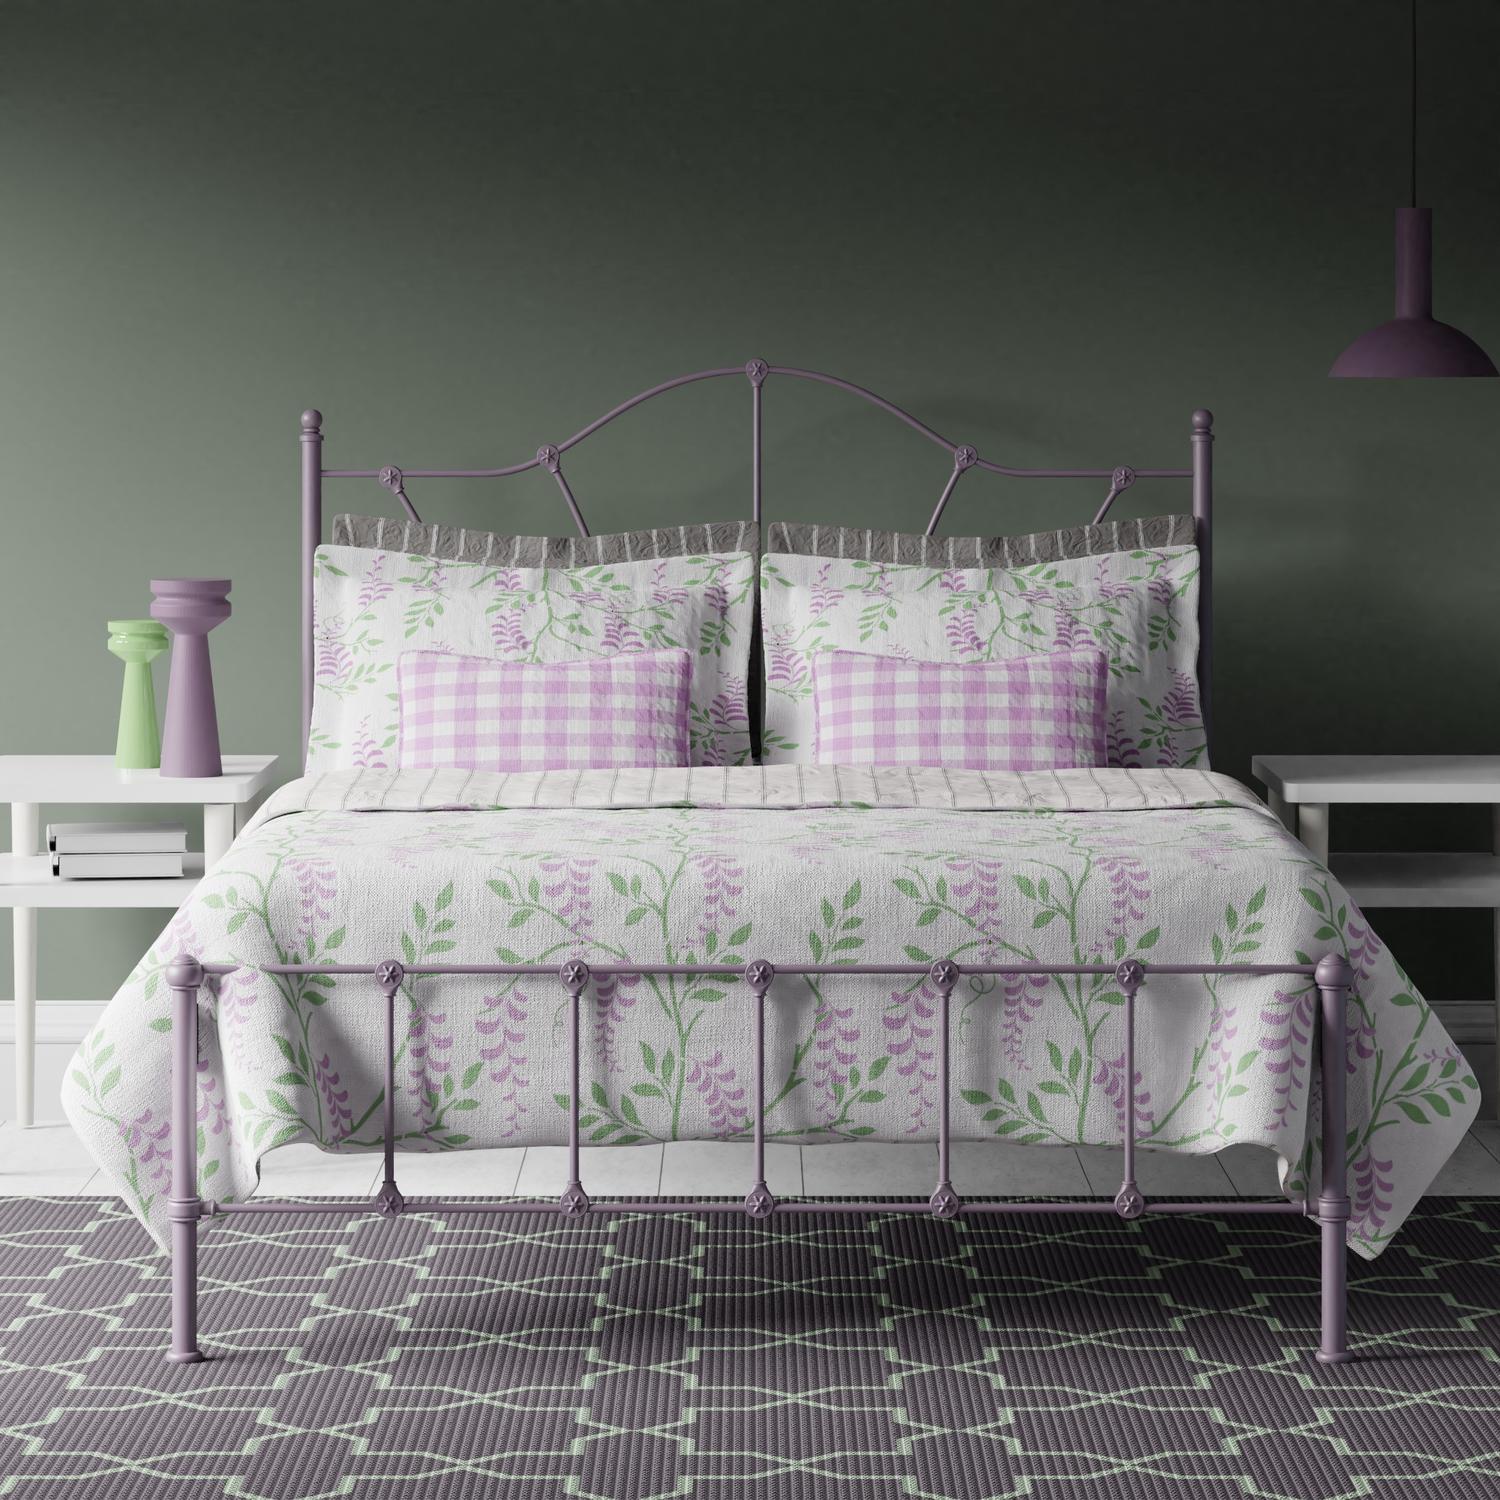 Claudia iron bed - Image lilac 1